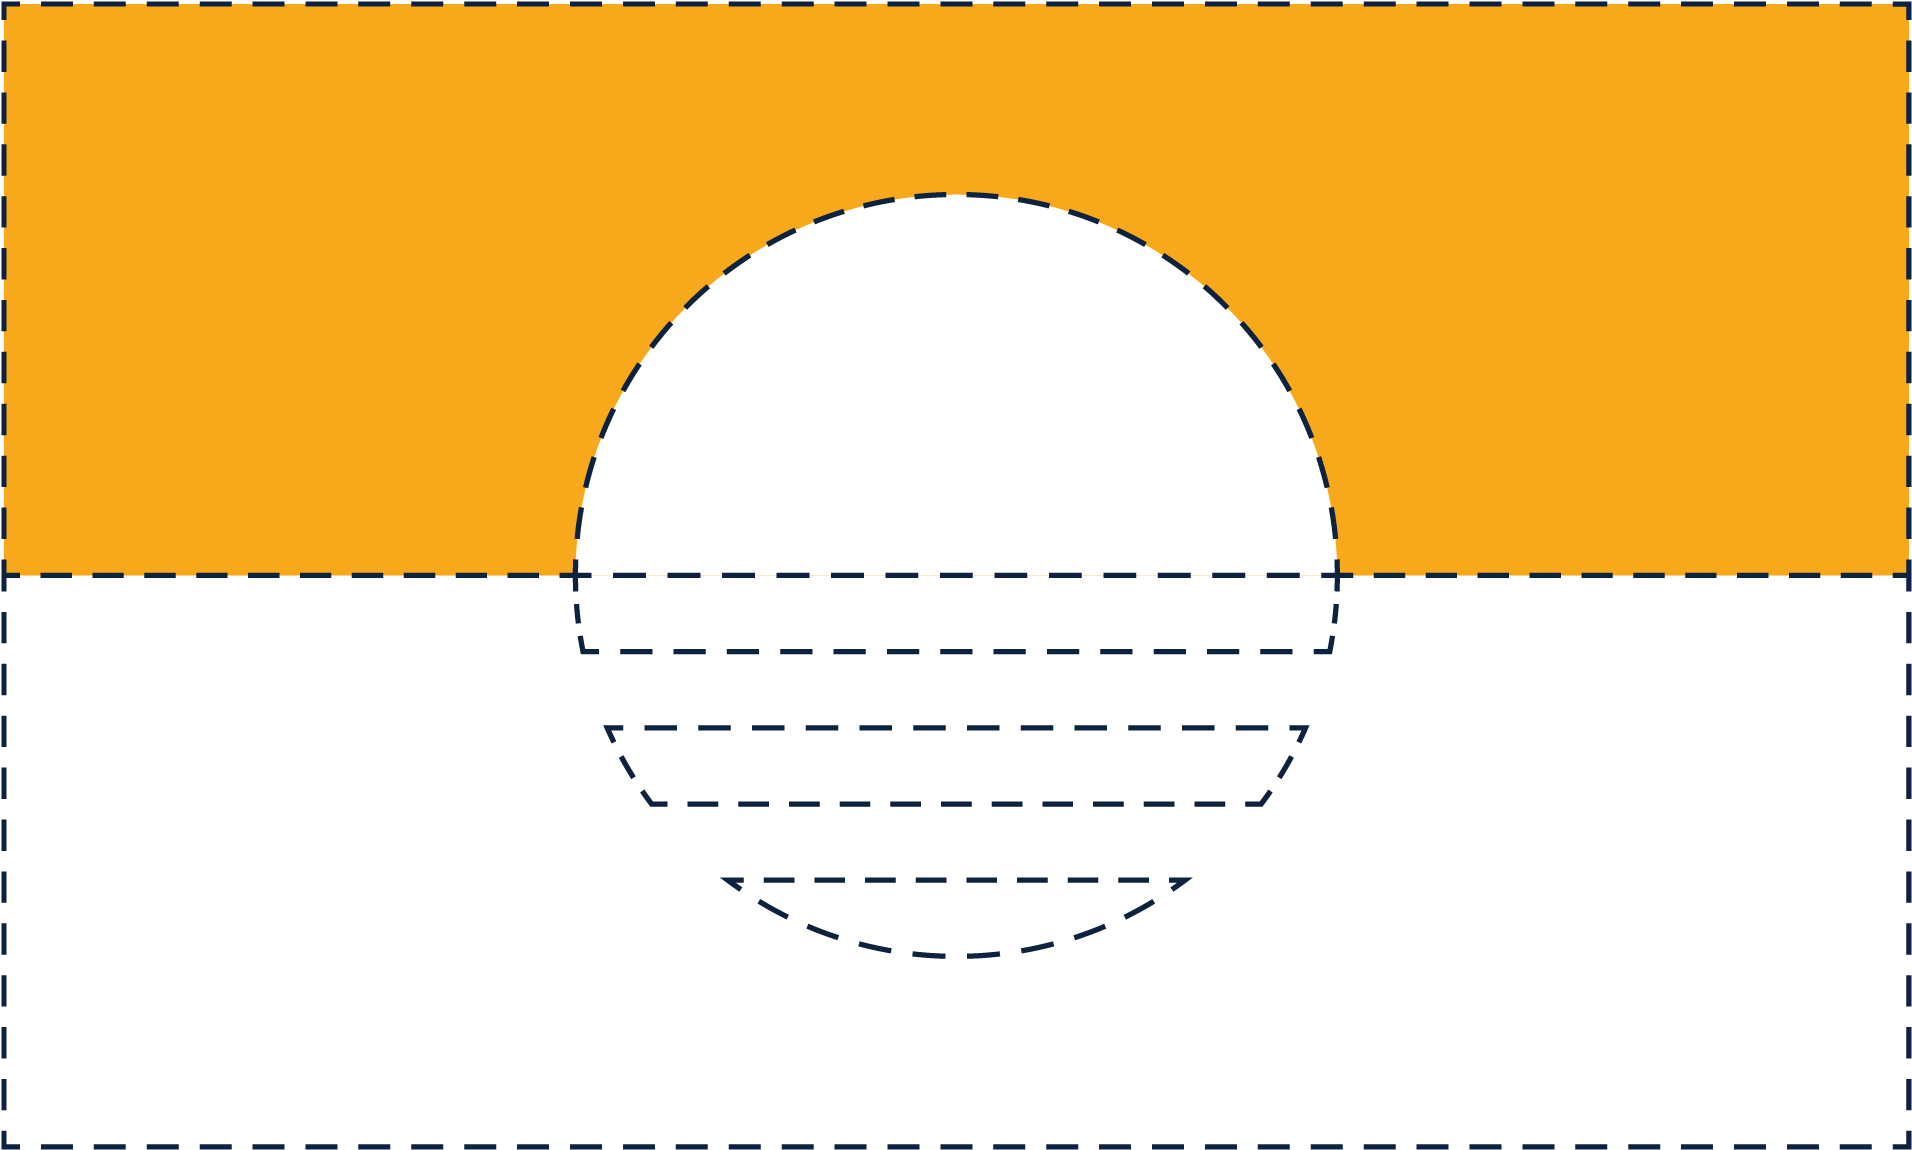 A Black Circle With Blue Lines On A Yellow Background